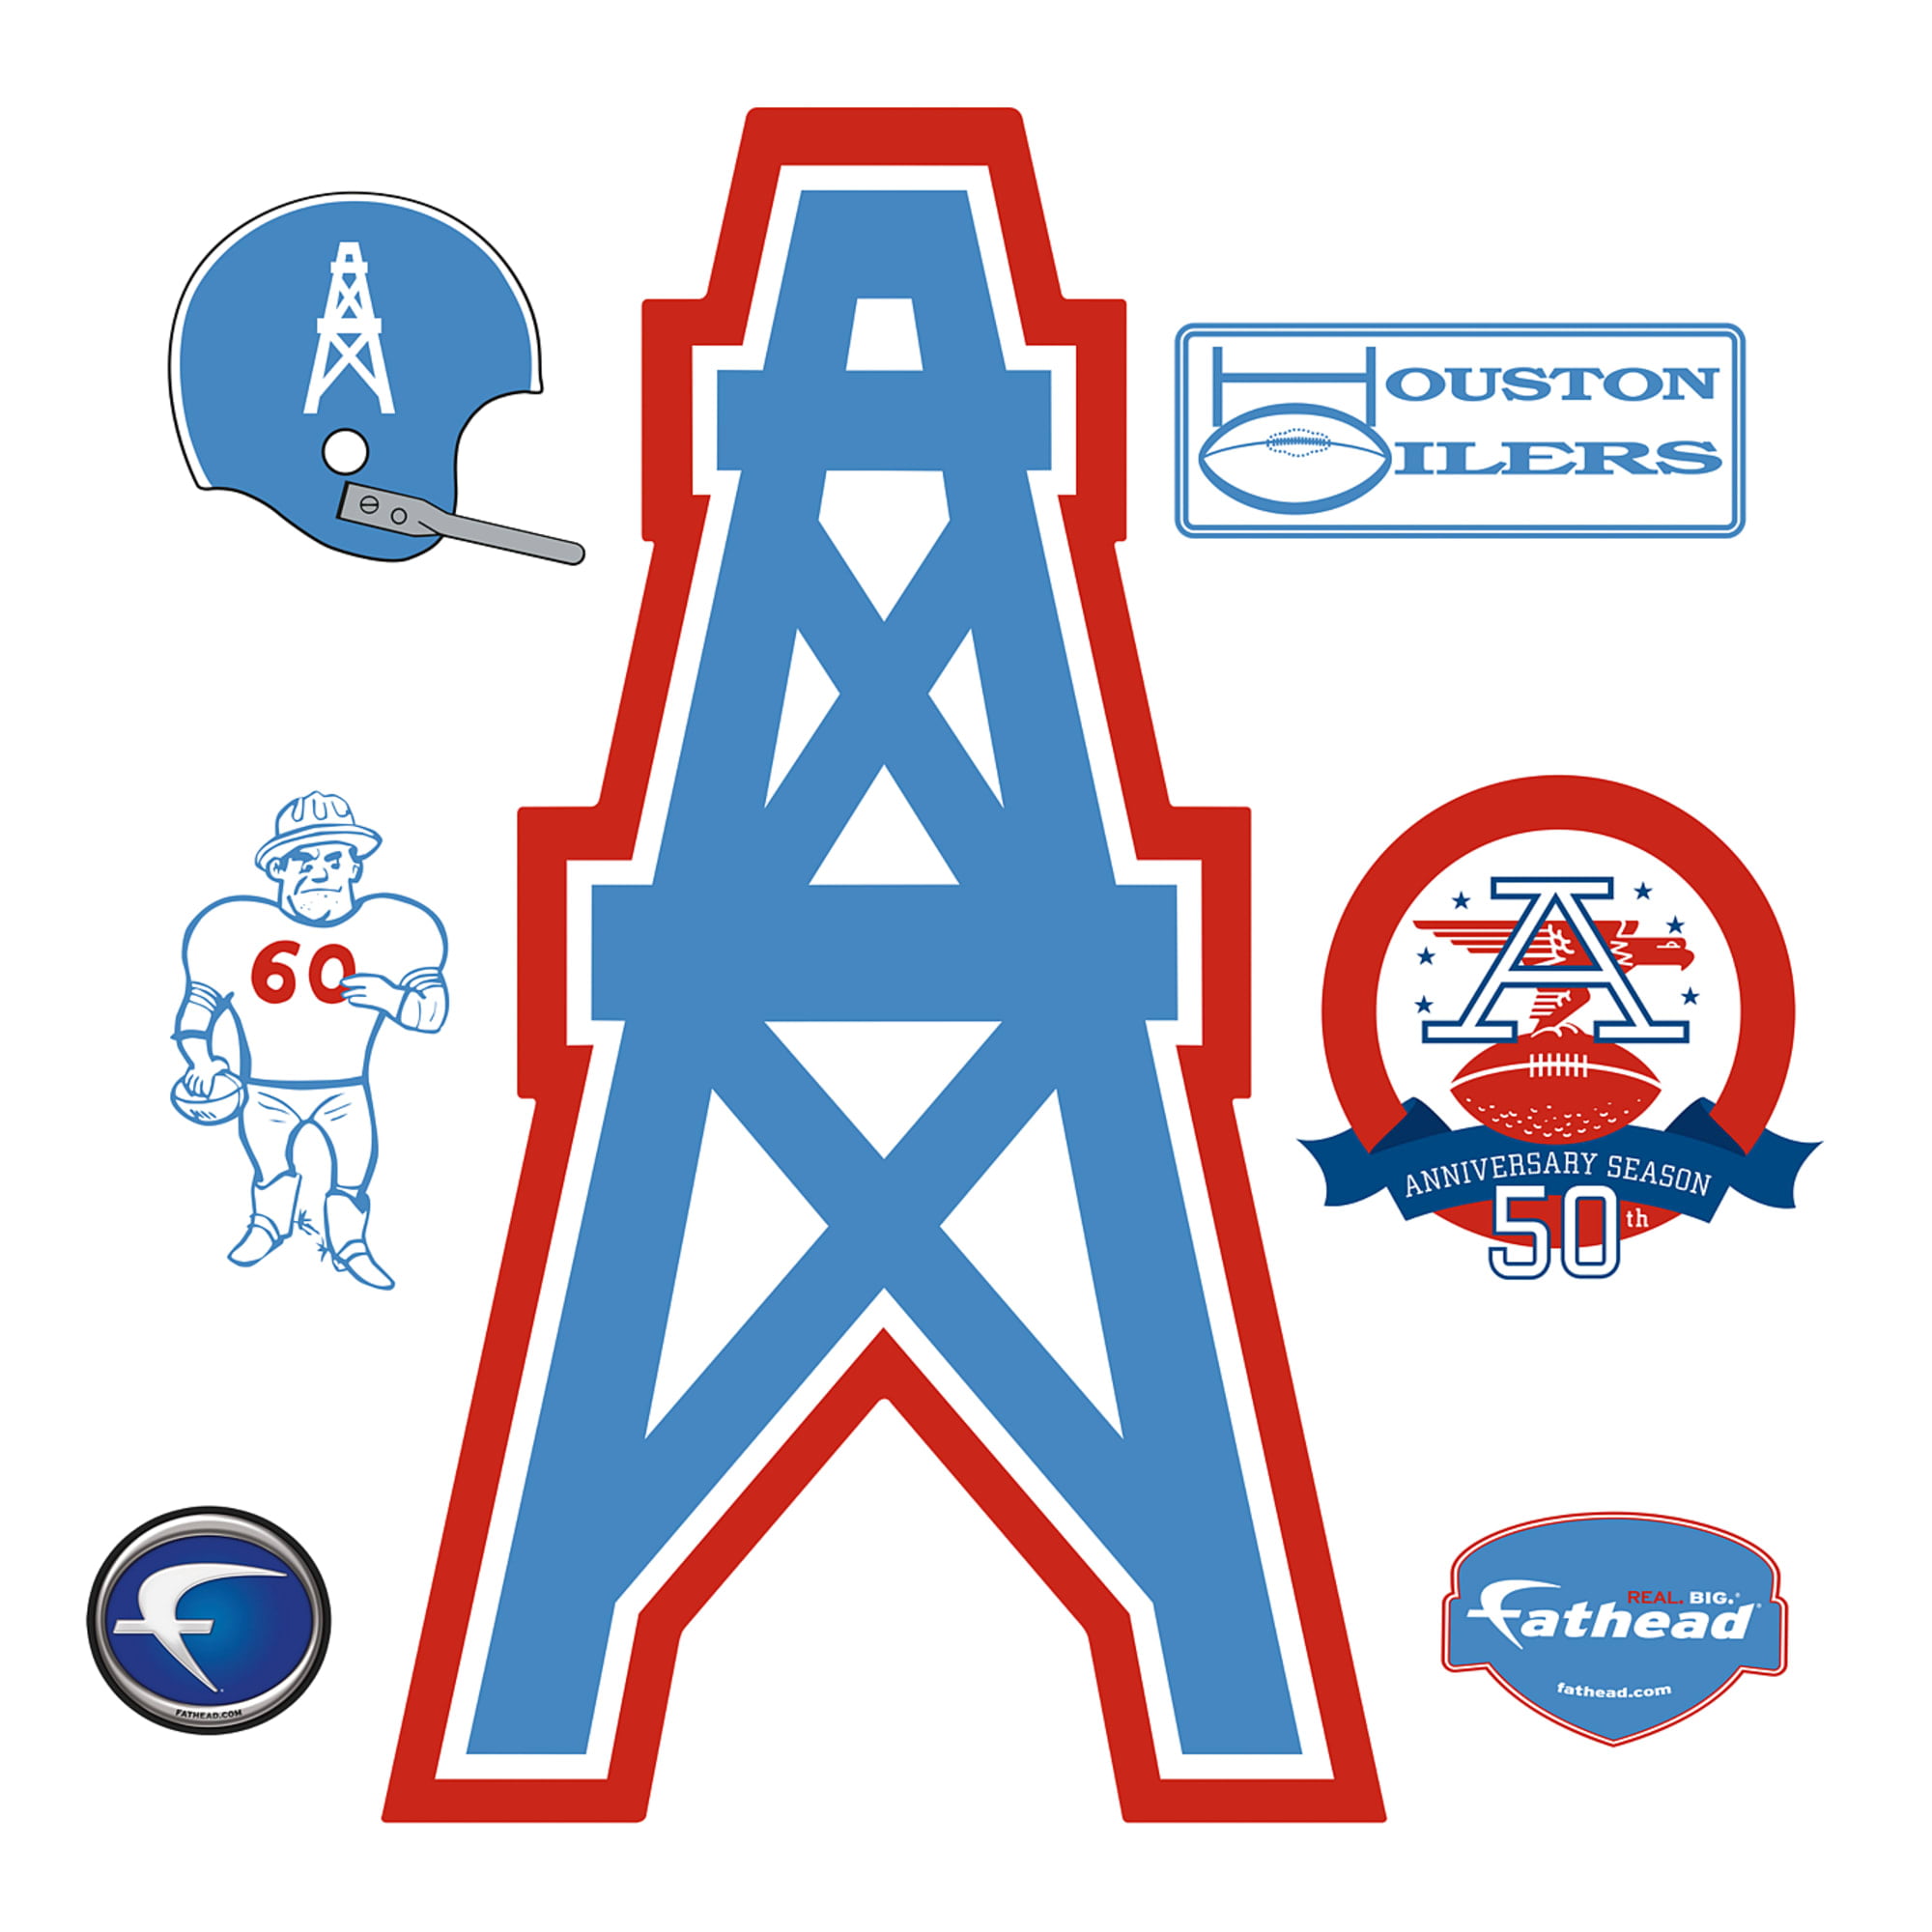 Fathead Houston Oilers: Original AFL Logo - Giant Officially Licensed NFL  Removable Wall Decal 